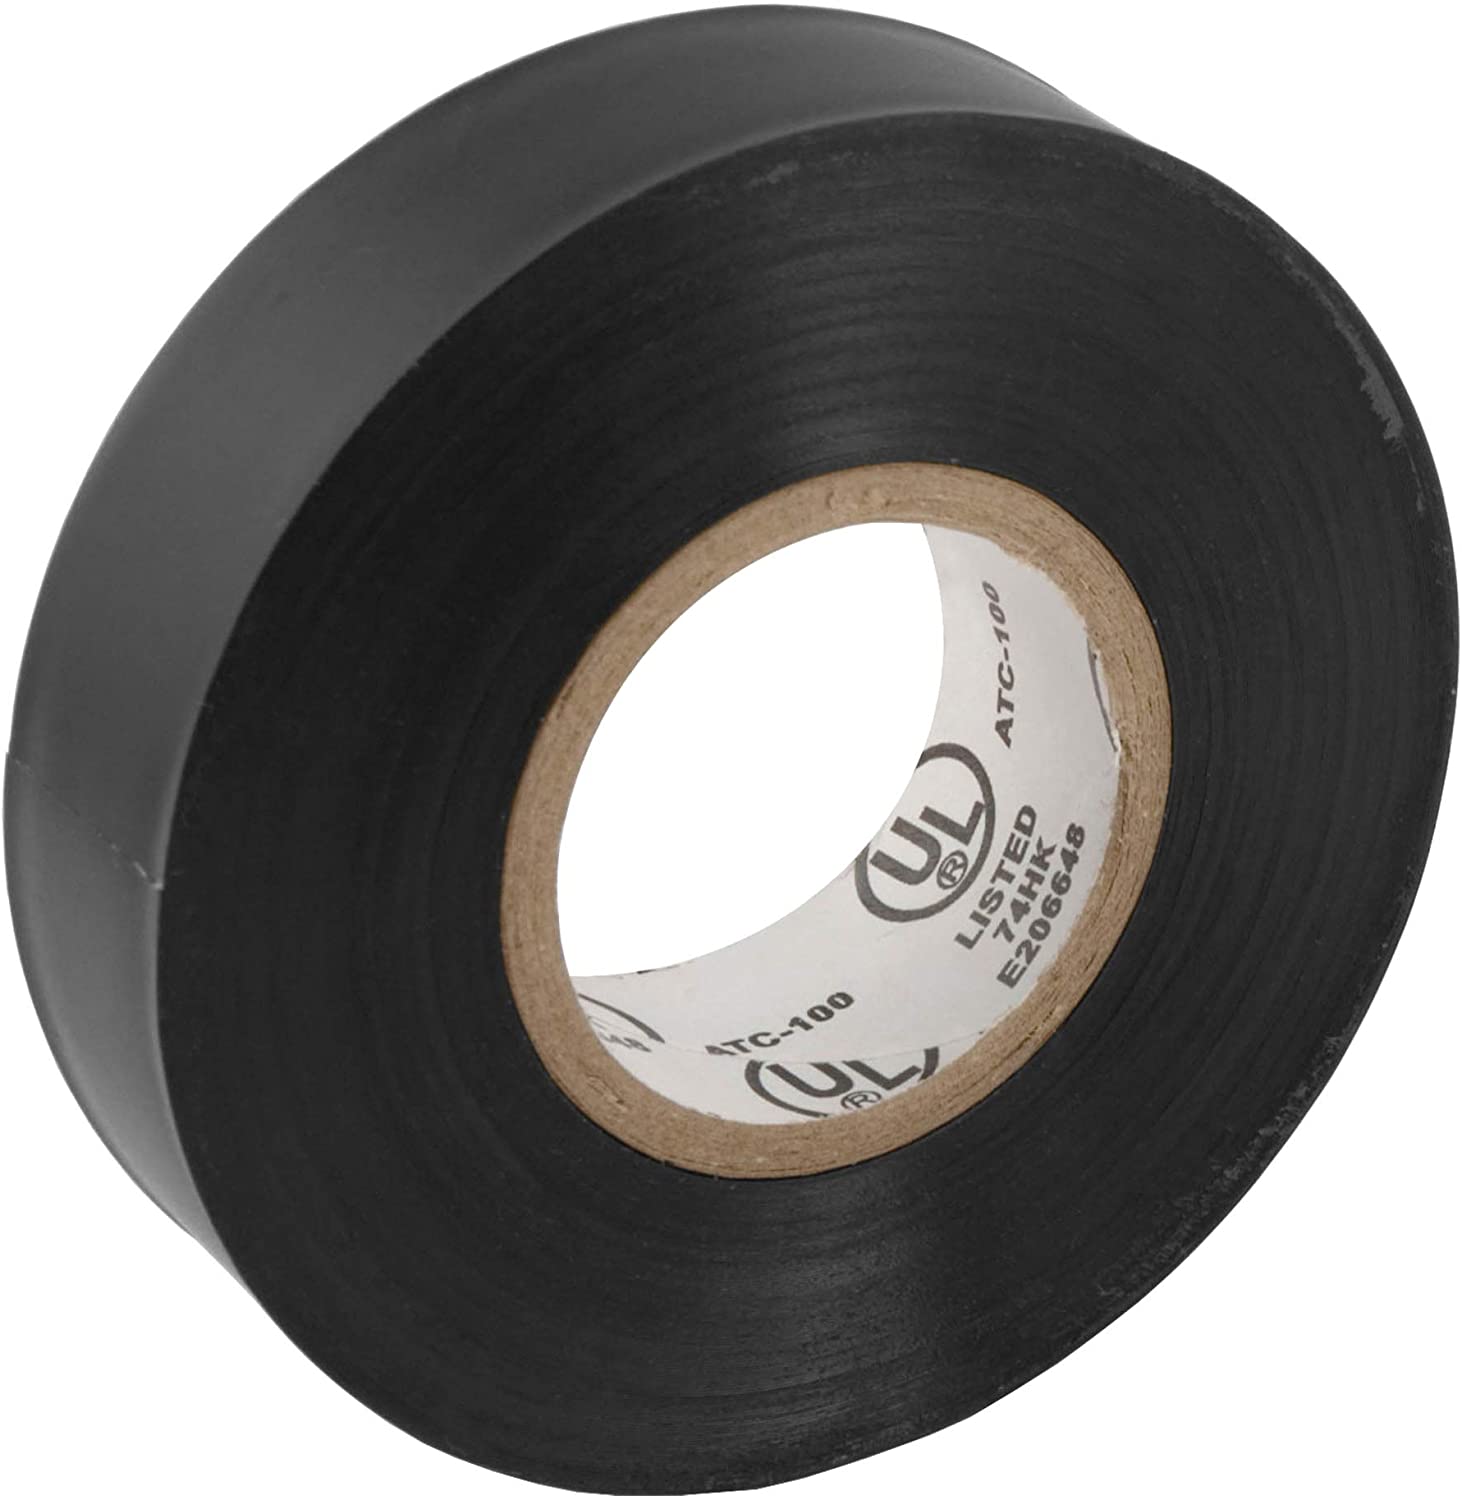 CURT 59740 Black Electrical Tape, 7 Mil, 3/4-Inch x 60-Foot Rolls, 10-Pack